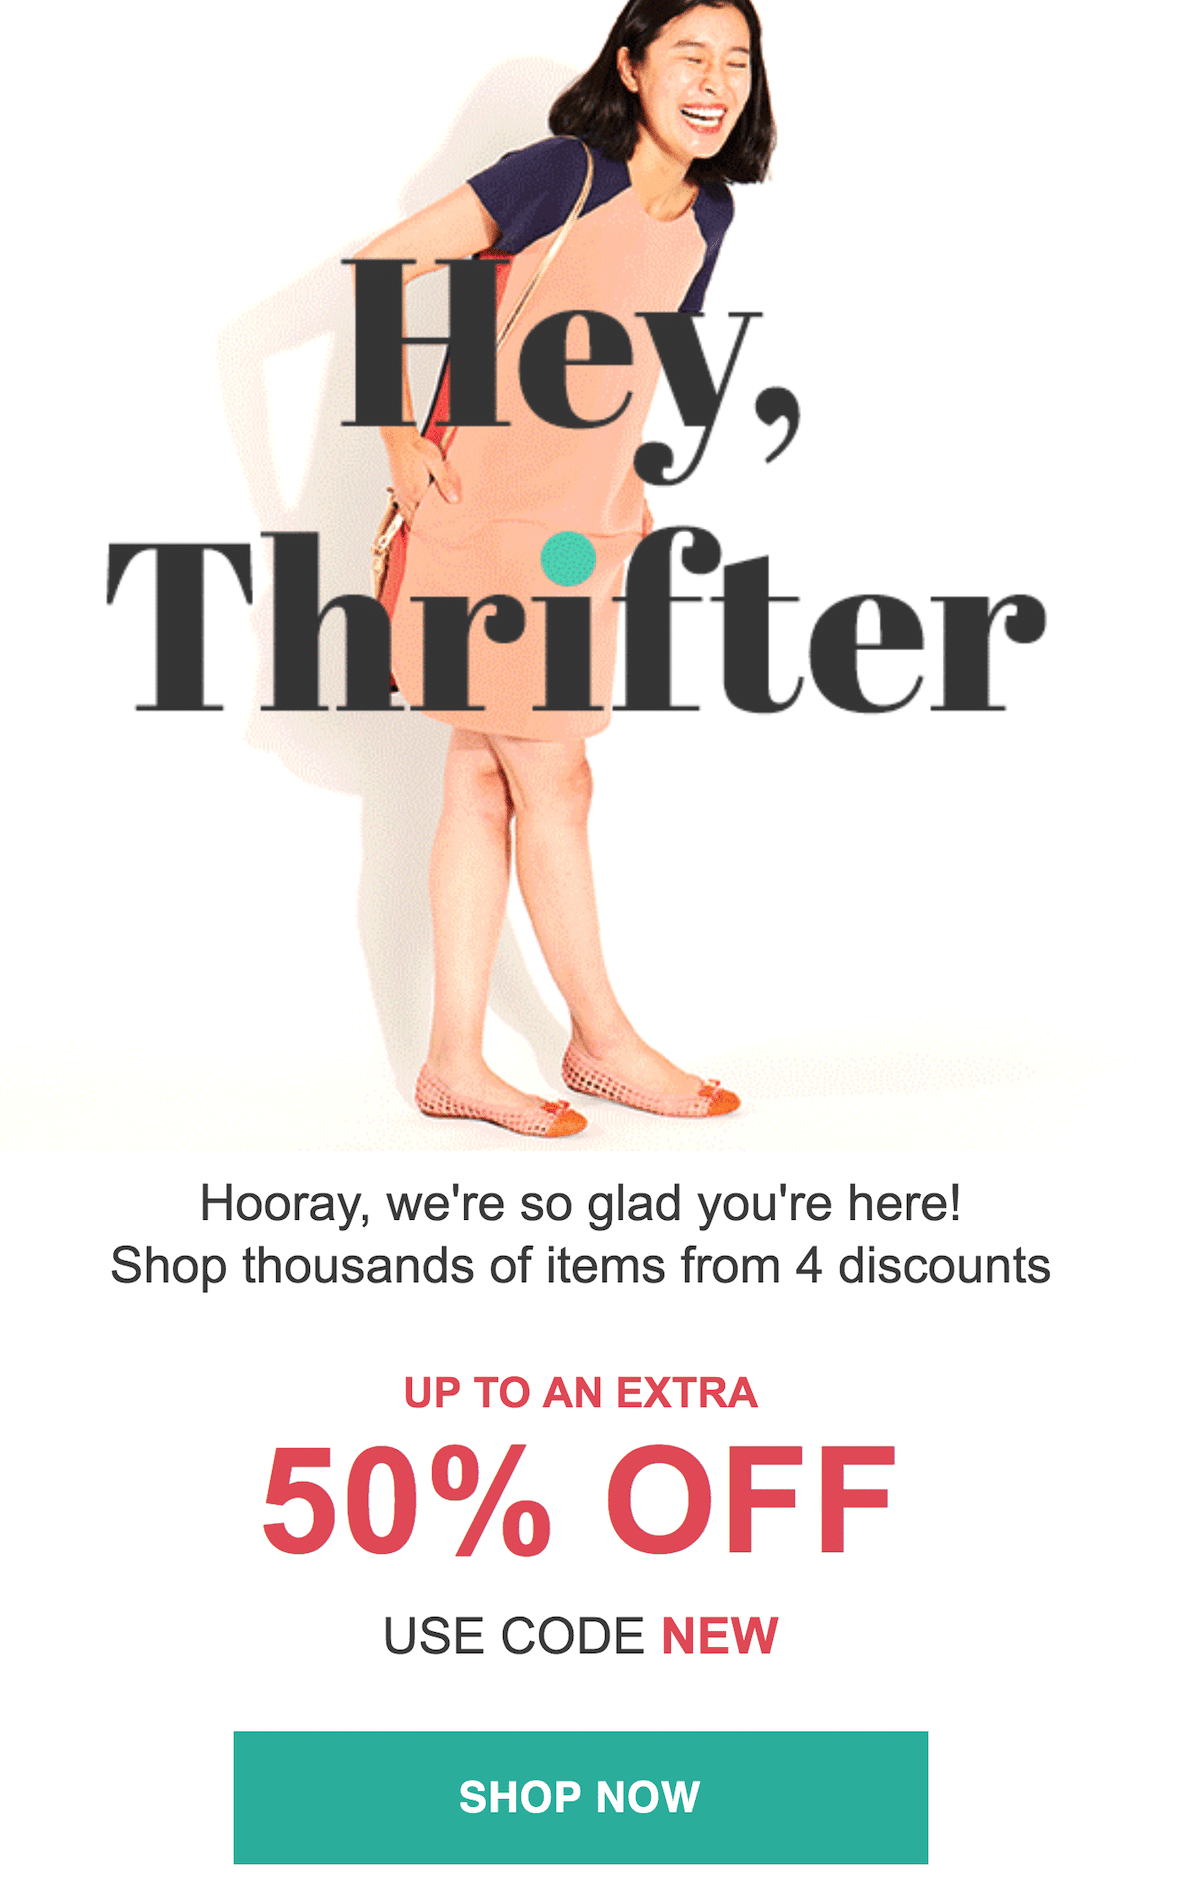 In this welcome email example from Thredup, a promotional code is offered to encourage conversions.